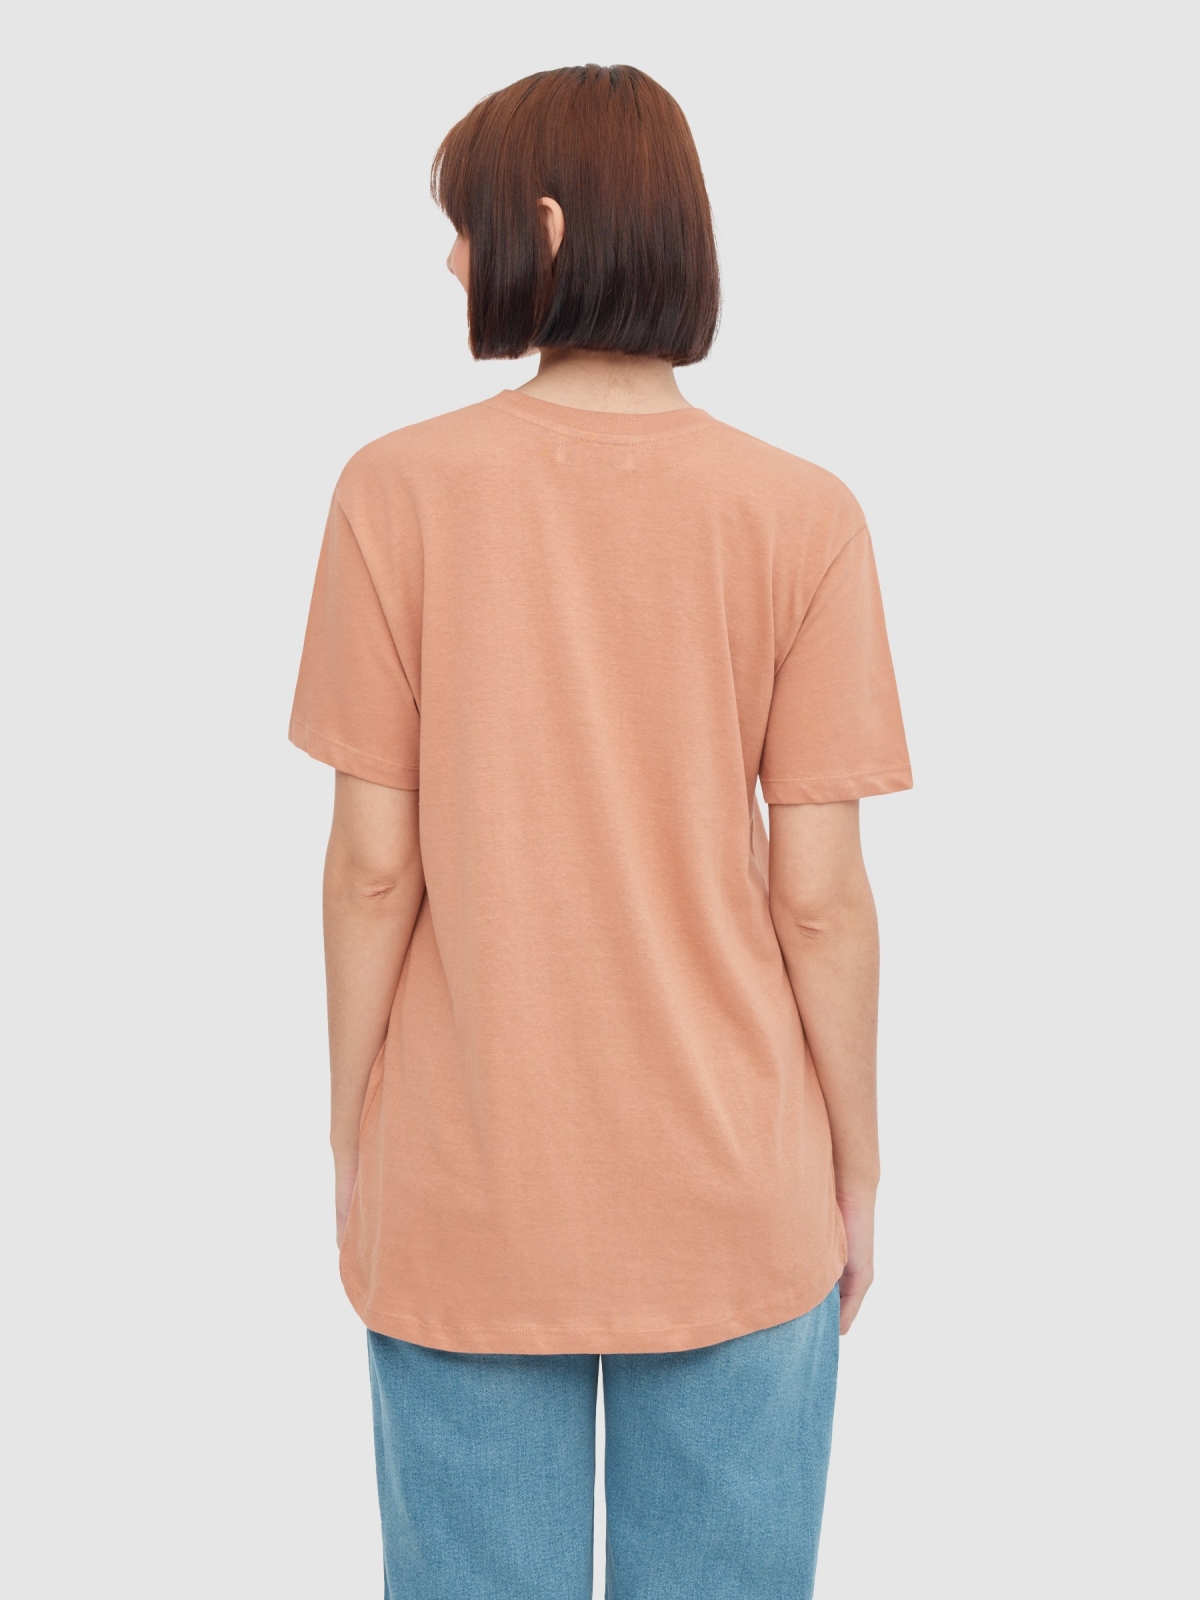 Travel oversize T-shirt light brown middle back view